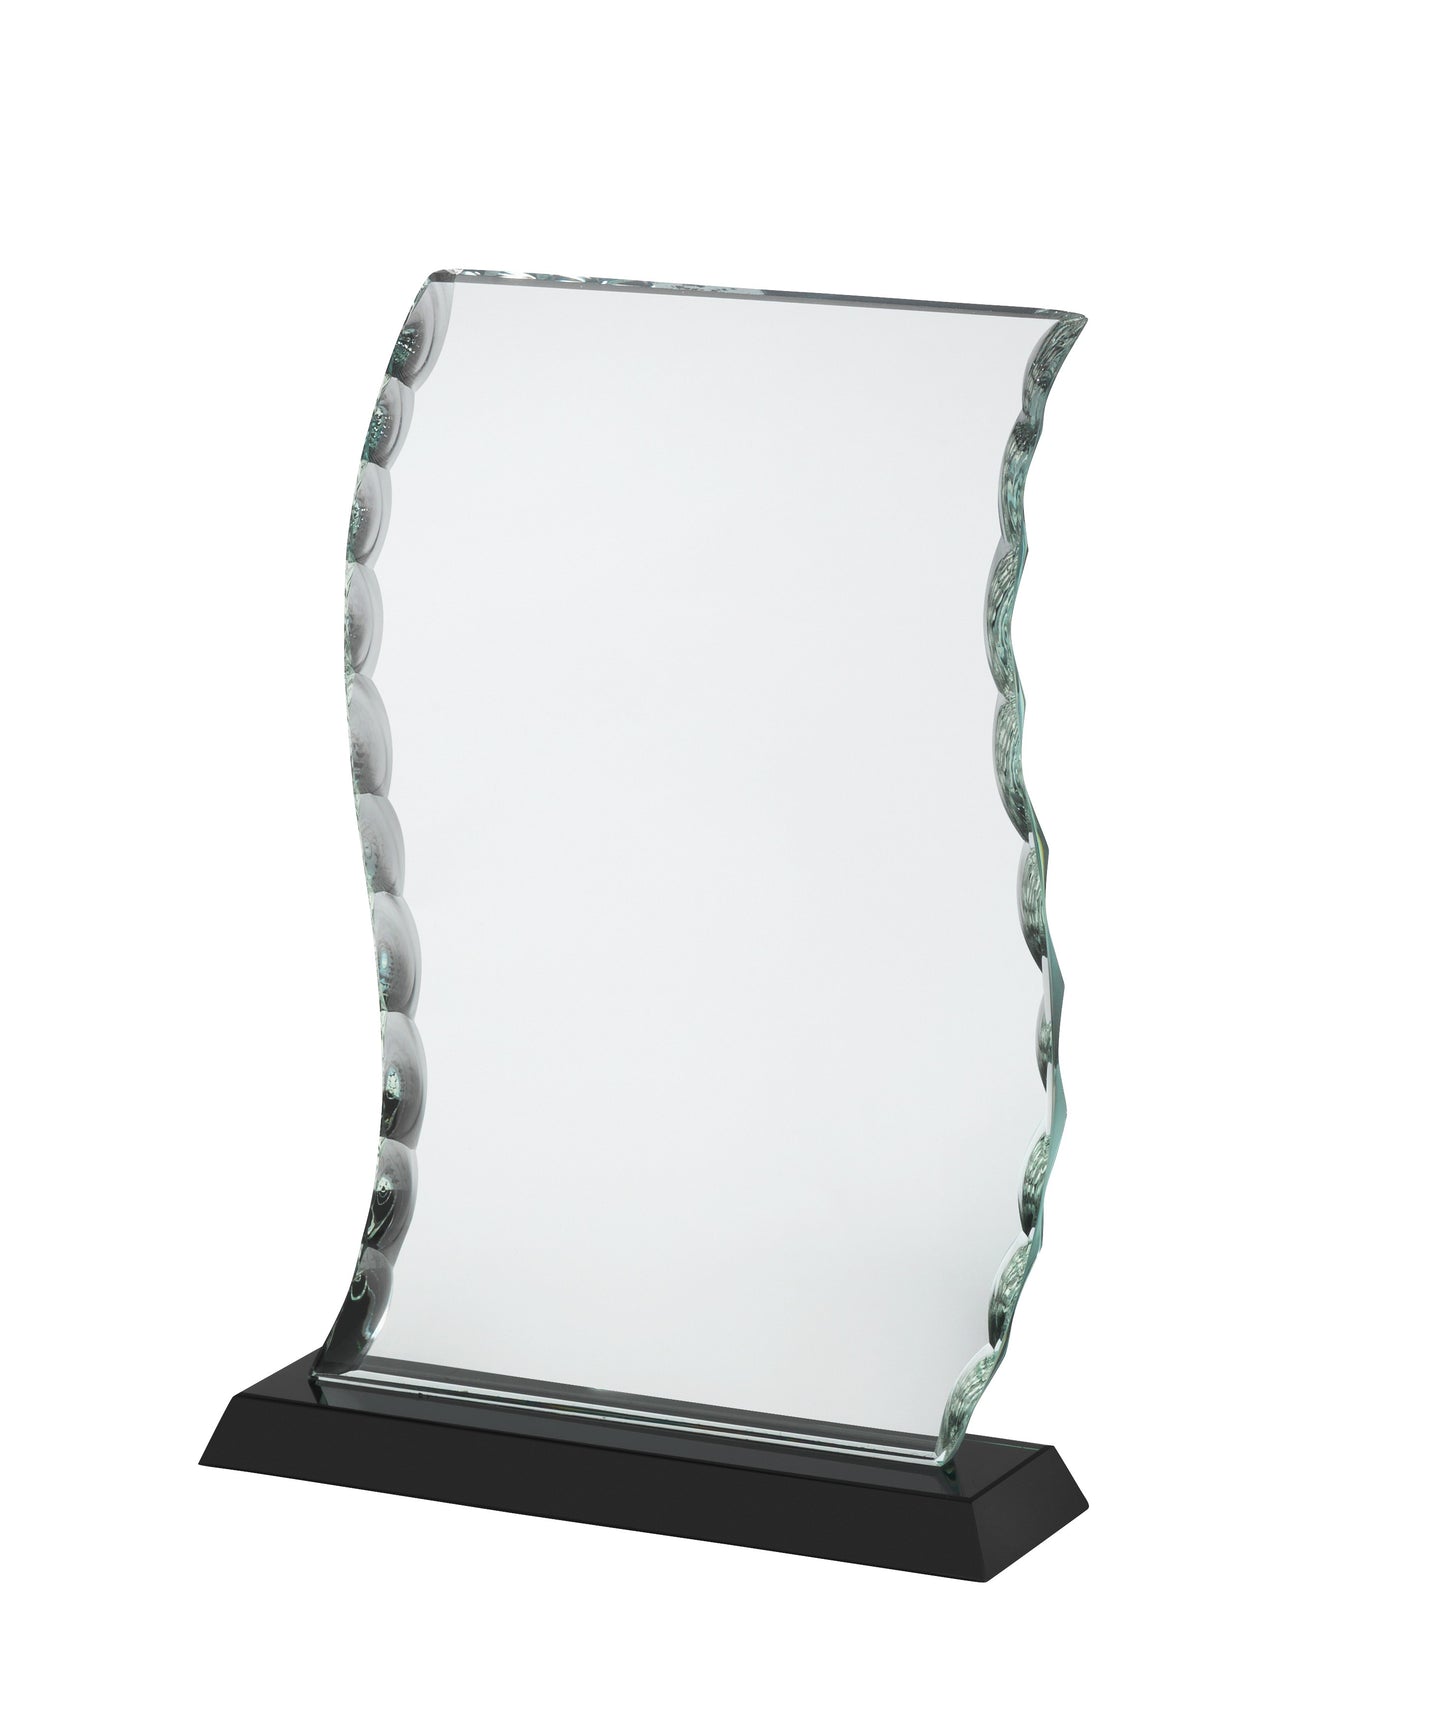 Clear & Black Crystal Wave Award with Patterened Edge